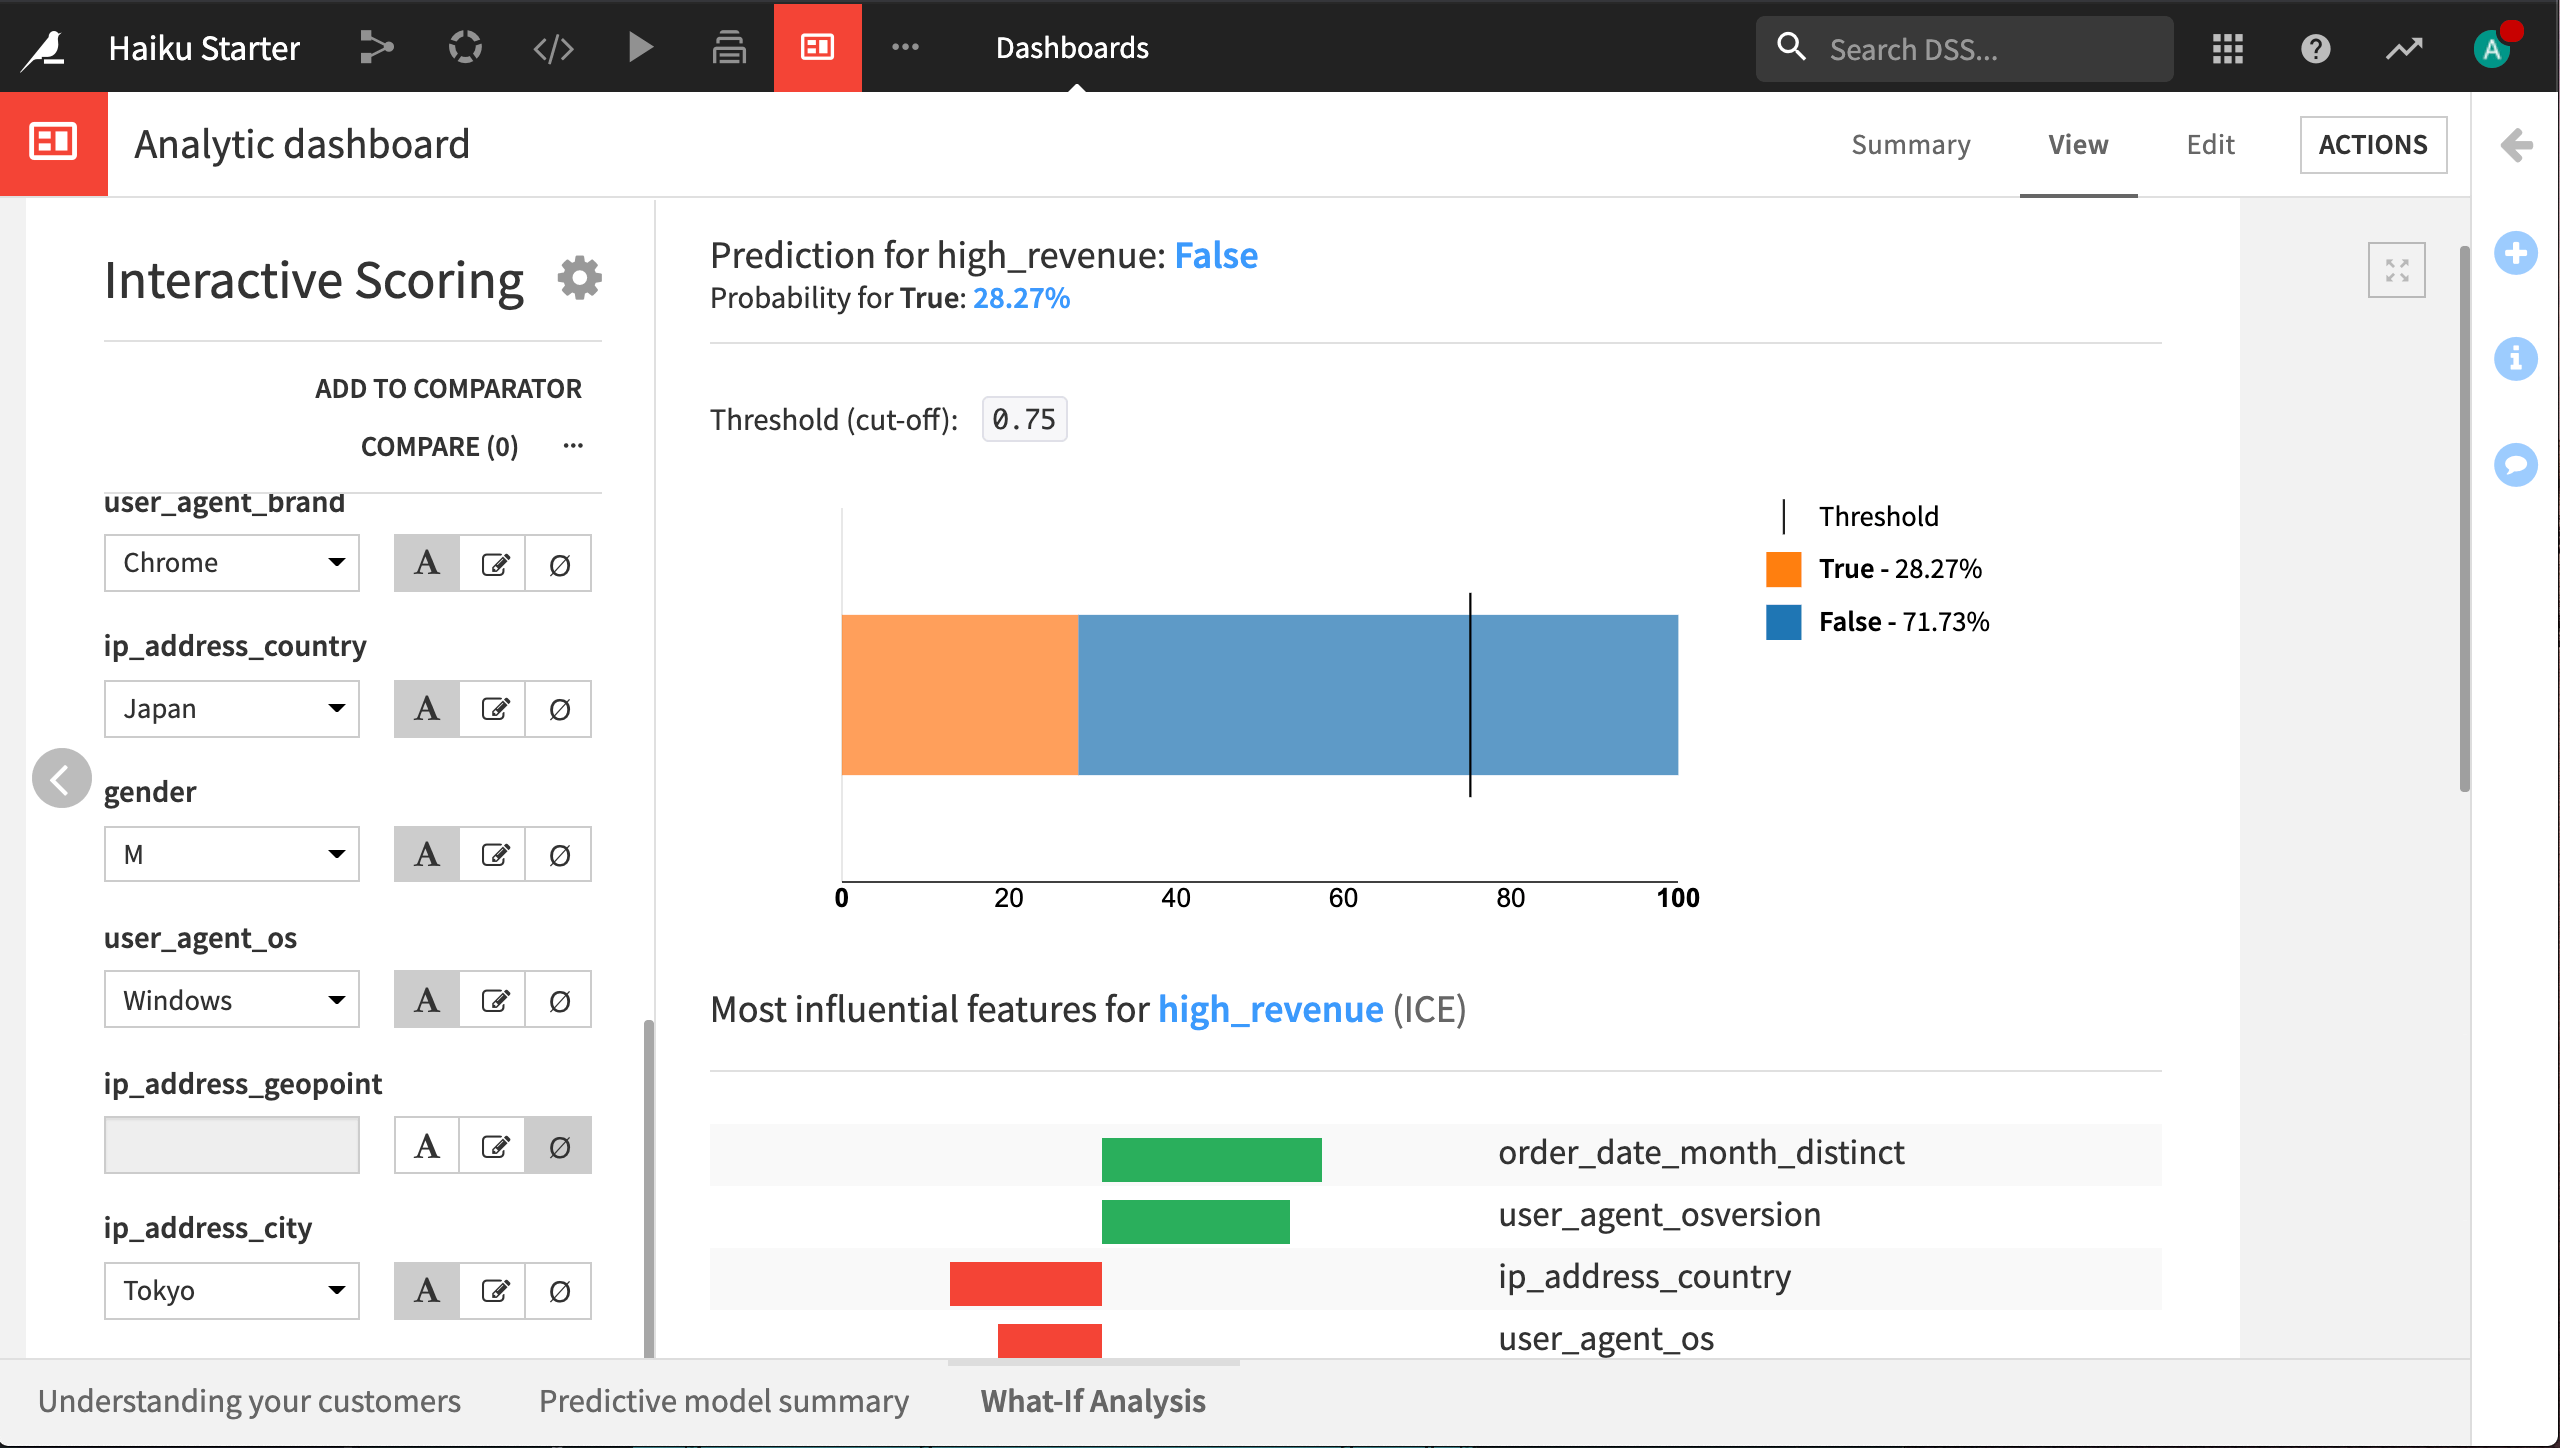 Dashboard slide containing an interactive scoring tile for what-if analysis, with custom values shown